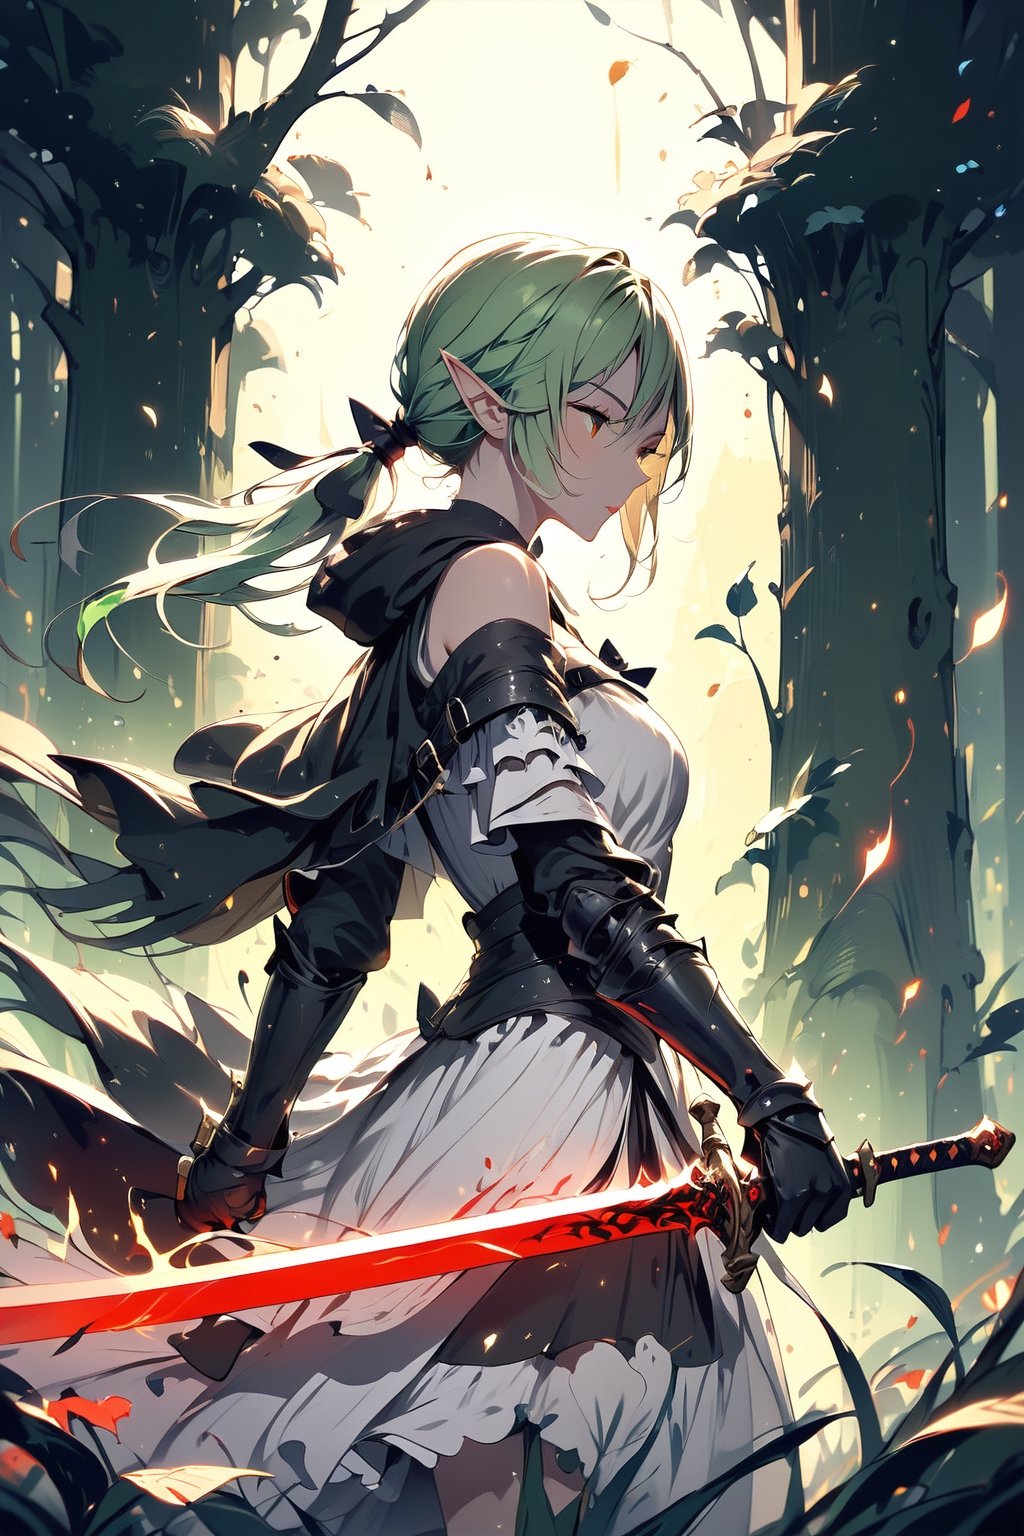 //quality, (masterpiece:1.331), (detailed), ((,best quality,)),//, extremely detailed CG,//,(1girl:1.3),solo,(elf:1.3),//,(lightgreen hair:1.331), long hair,(low ponytail),bangs,hair_bows, (green eye:1.3),breasts,//,(white ethereal armor),white dress,(off-shoulder:1.1),(cloak:1.1),belts,, gloves,//,blush, expressionless, closed_mouth,//,( holding glowing sword: 1.3),red glowing sword, (red flaming sword:1.3),battle_stance,,/, forest, nature,sunset,//,emo,scenery,glowing sword,dark anime,dark fantasy, darkgreenred tone,((from side,viewed_from_side))